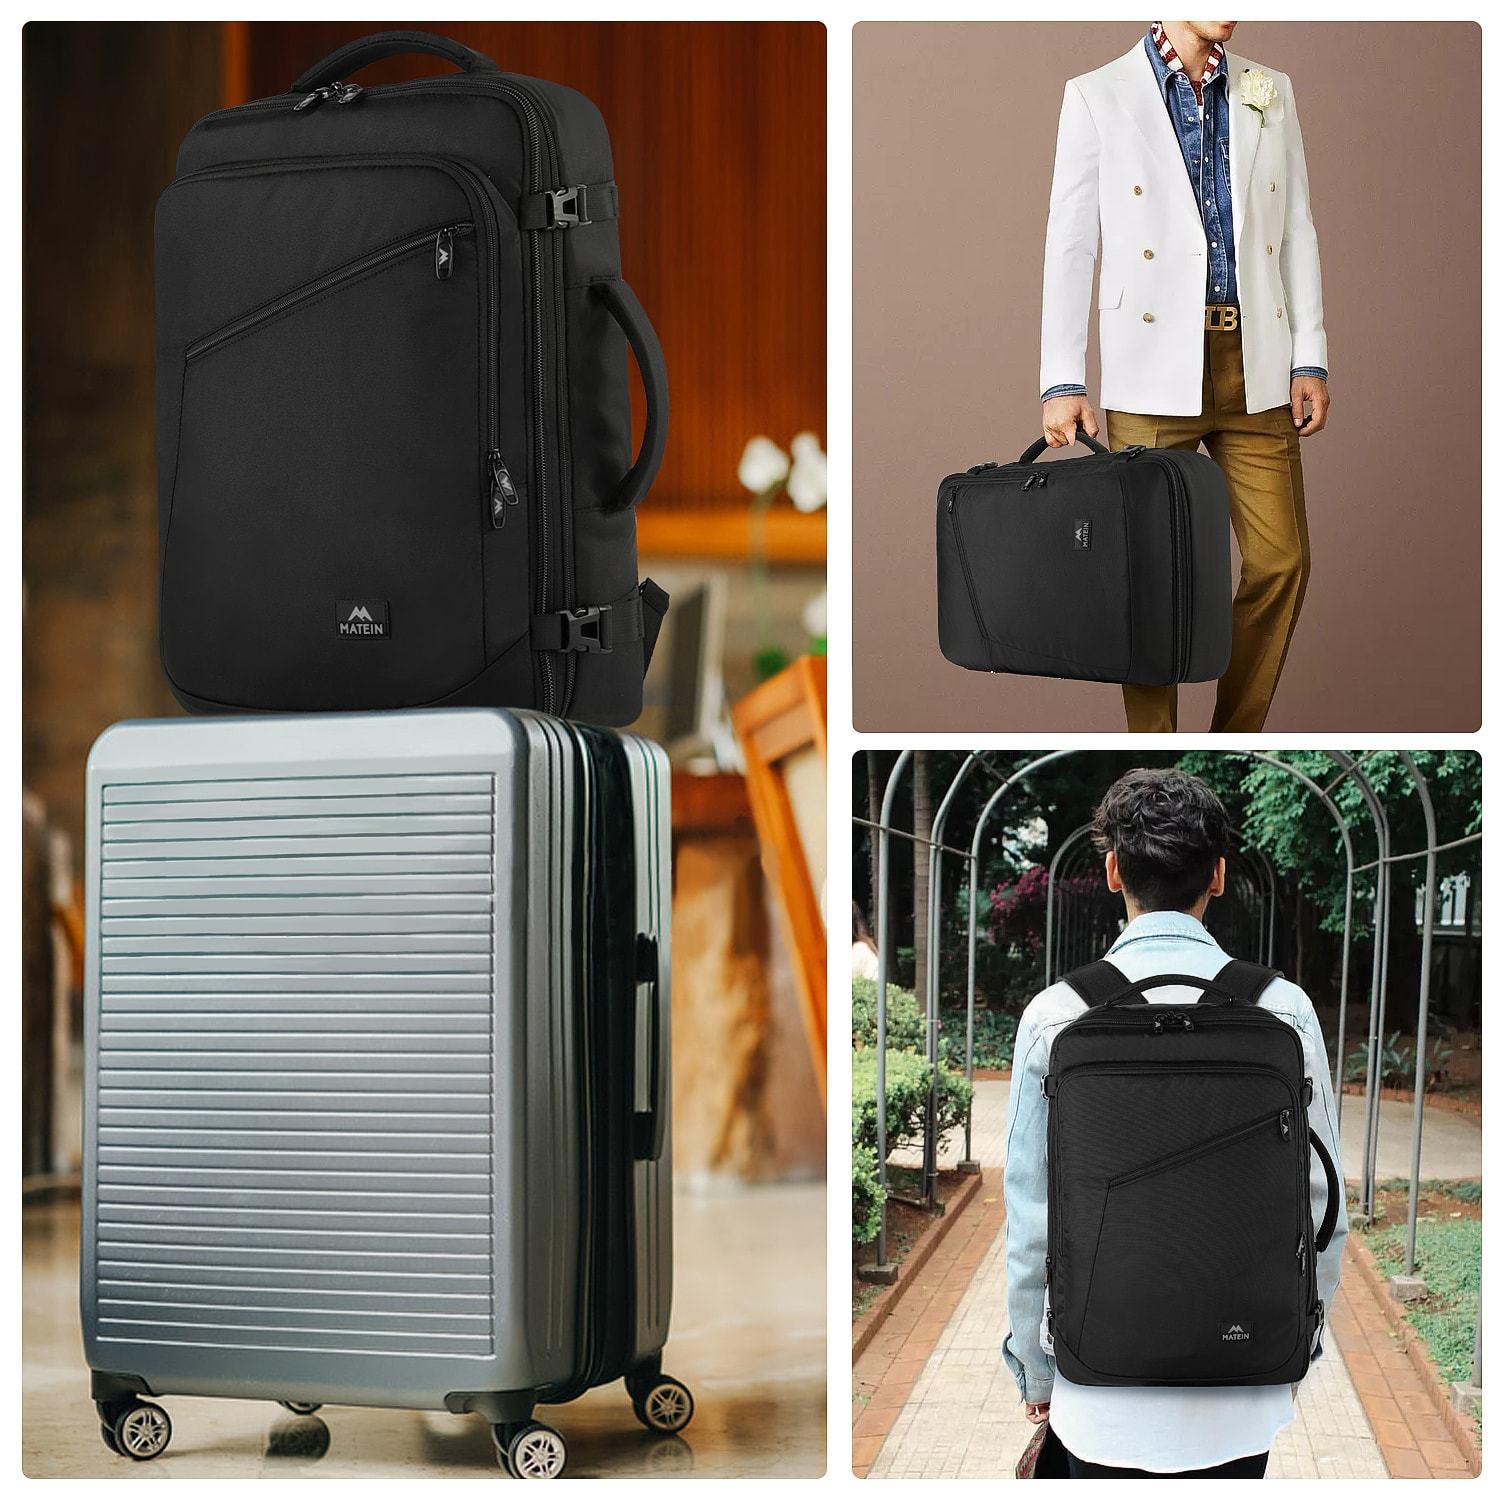 Matein Carry-on big Backpack